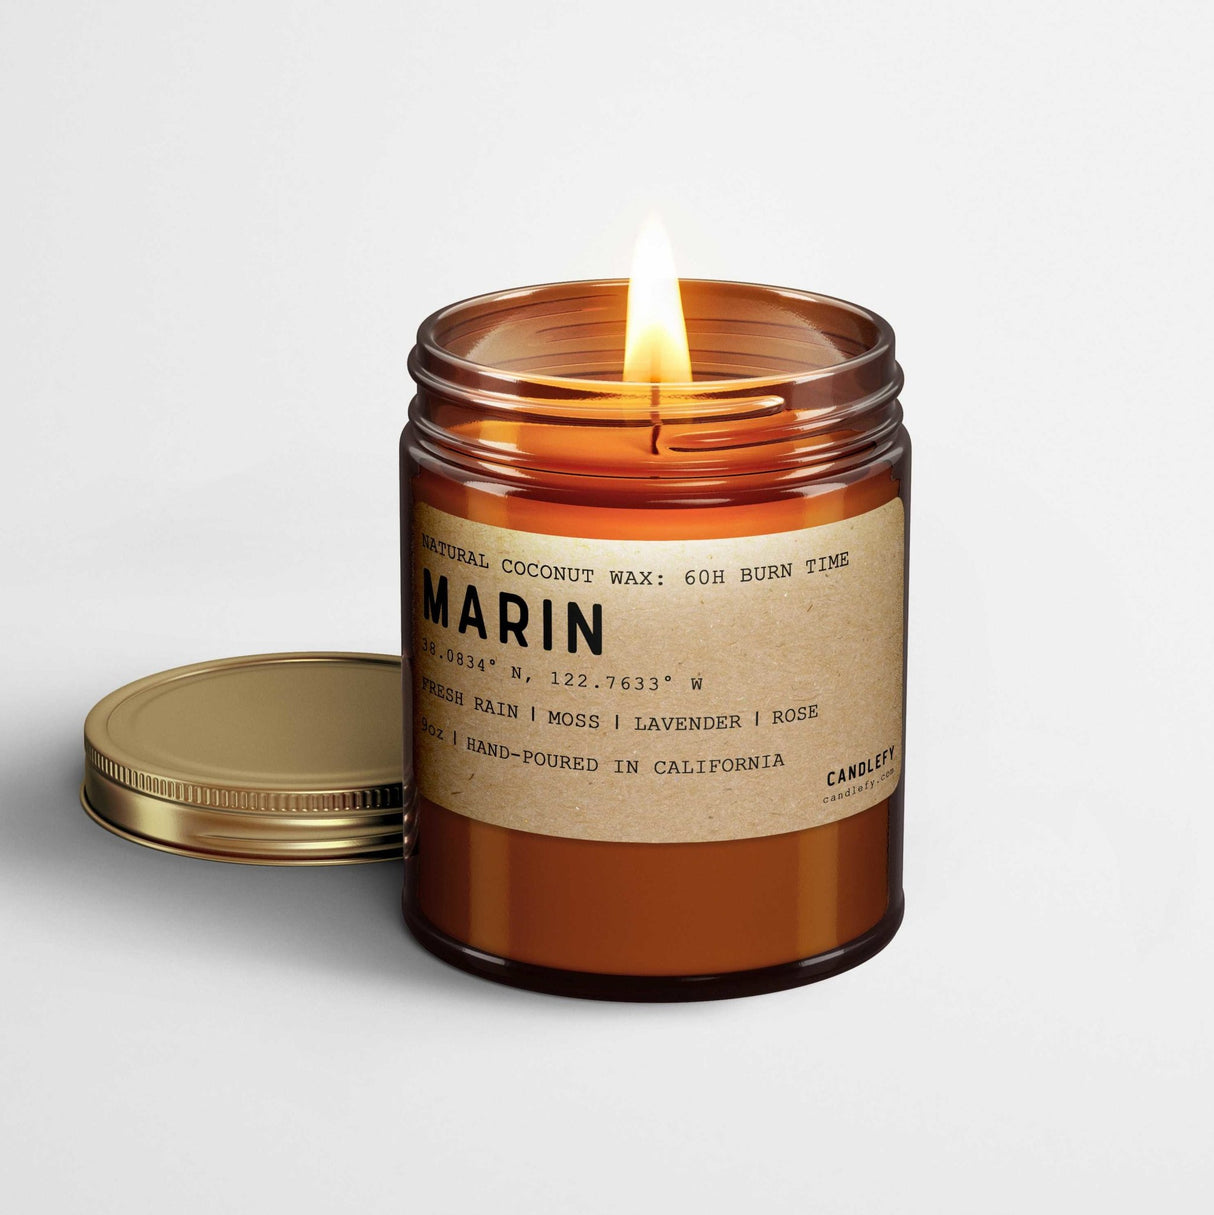 Marin: California Scented Candle - Candlefy